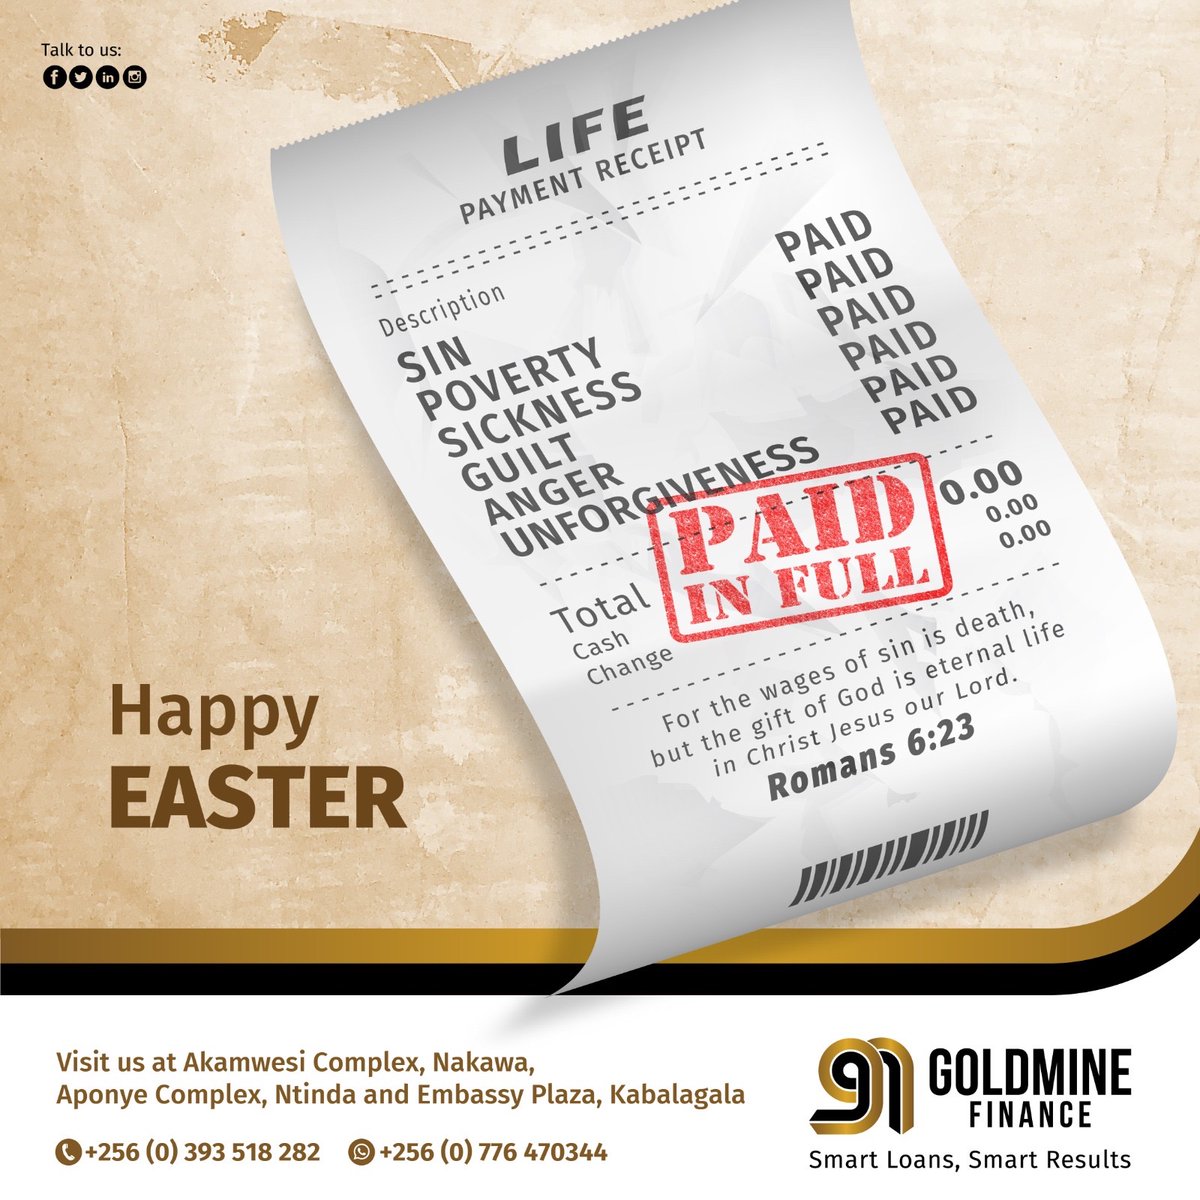 Happy Easter from us to you #EasterSunday #HeisRisen #GoldmineFinance #SmartLoansSmartResults #Easter